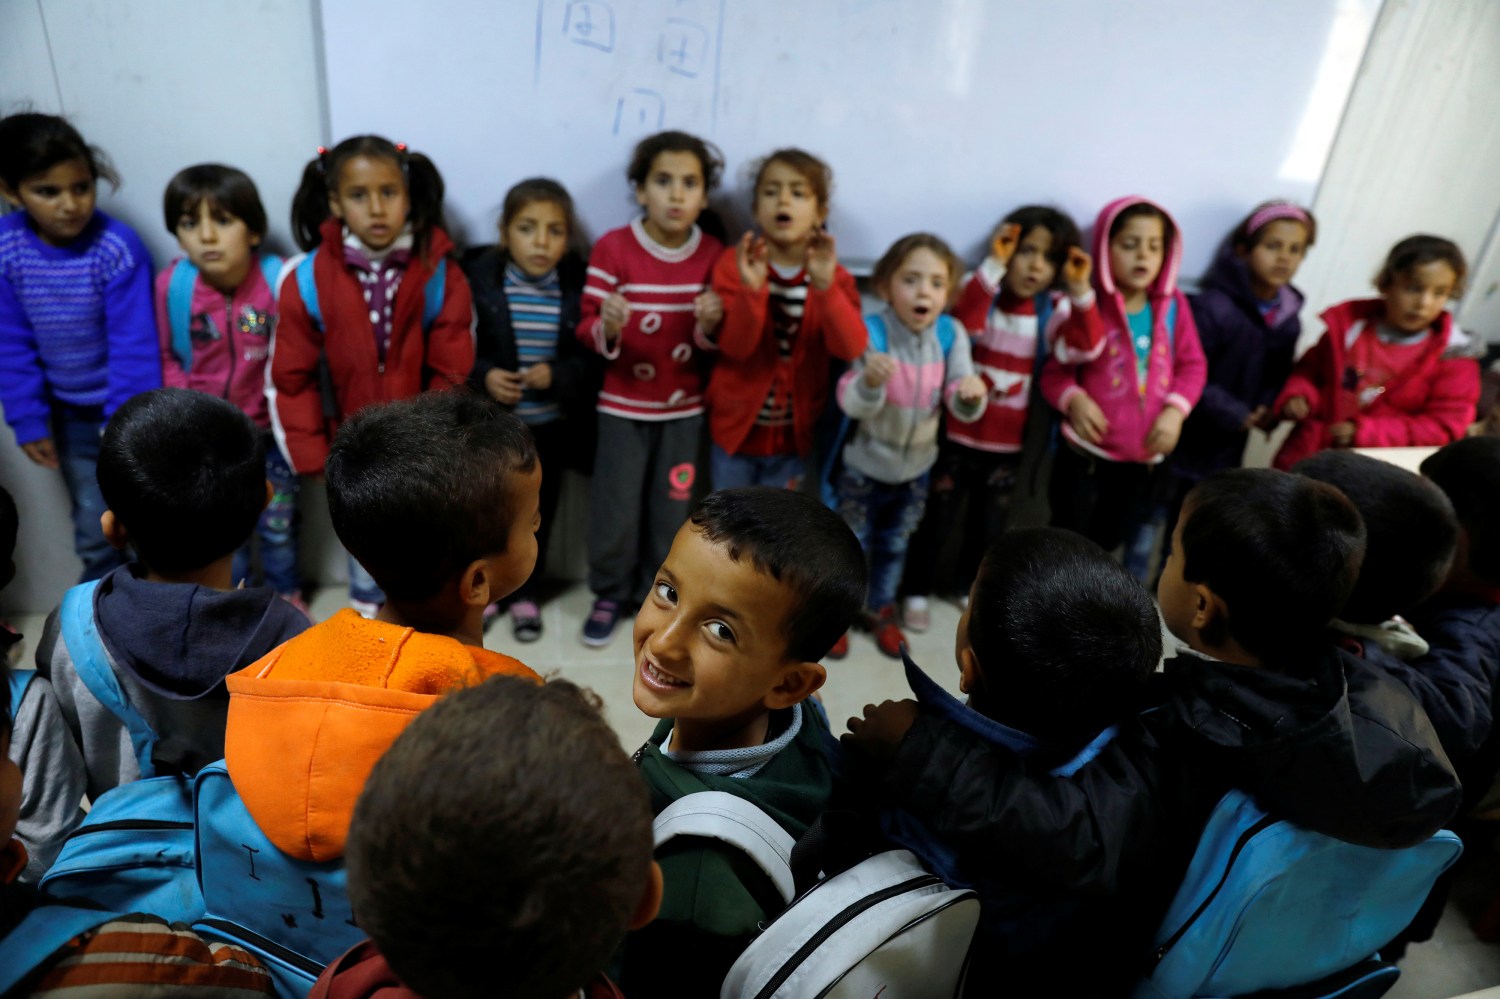 Syrian refugee students sing a song during a lesson at a school in Nizip refugee camp